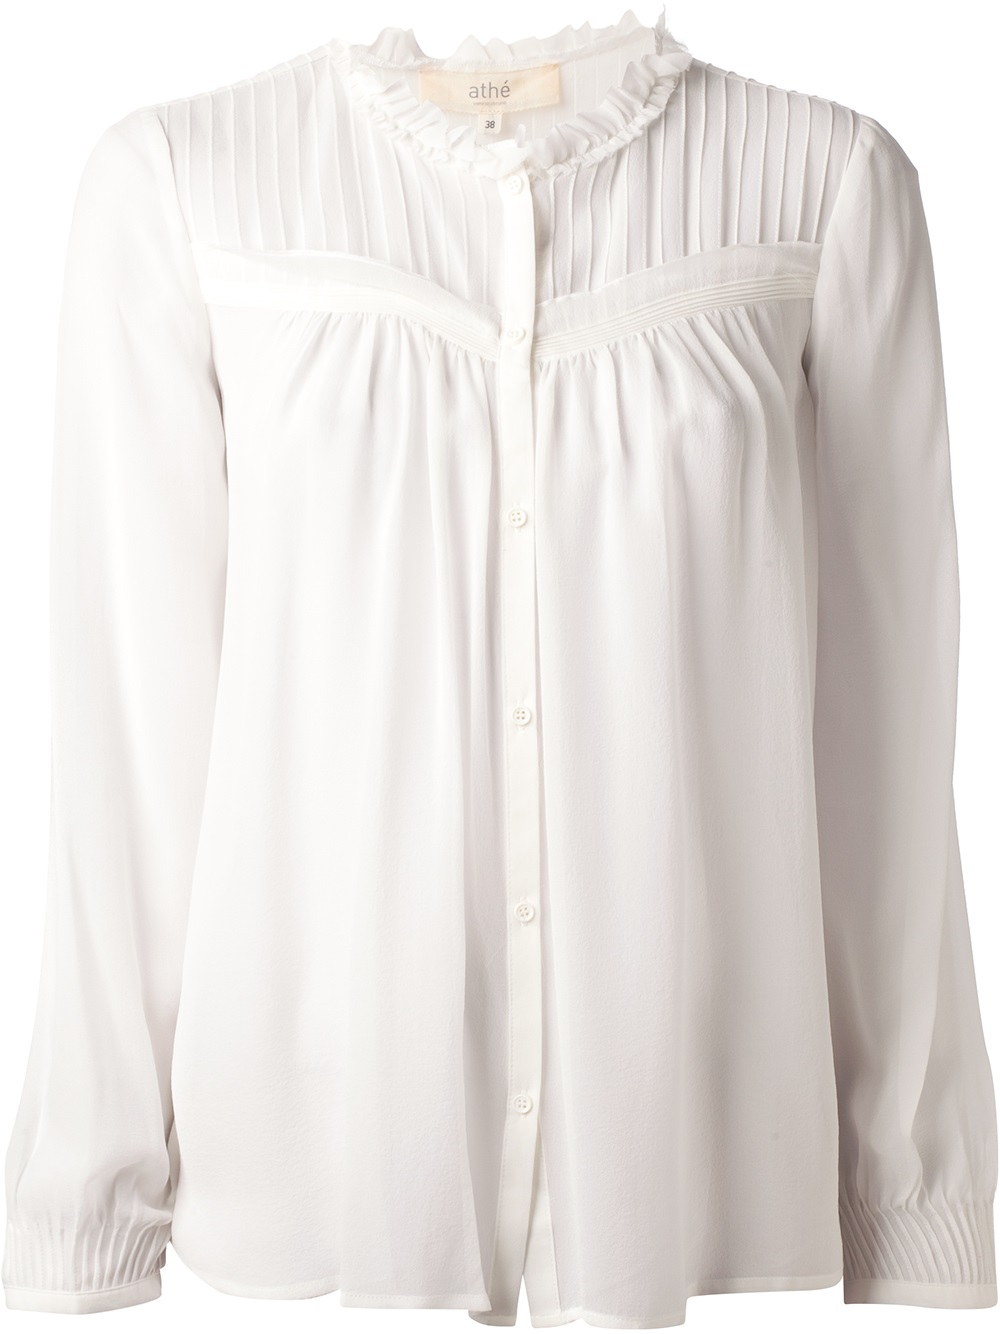 Lyst - Vanessa Bruno Athé Pleated Blouse in White